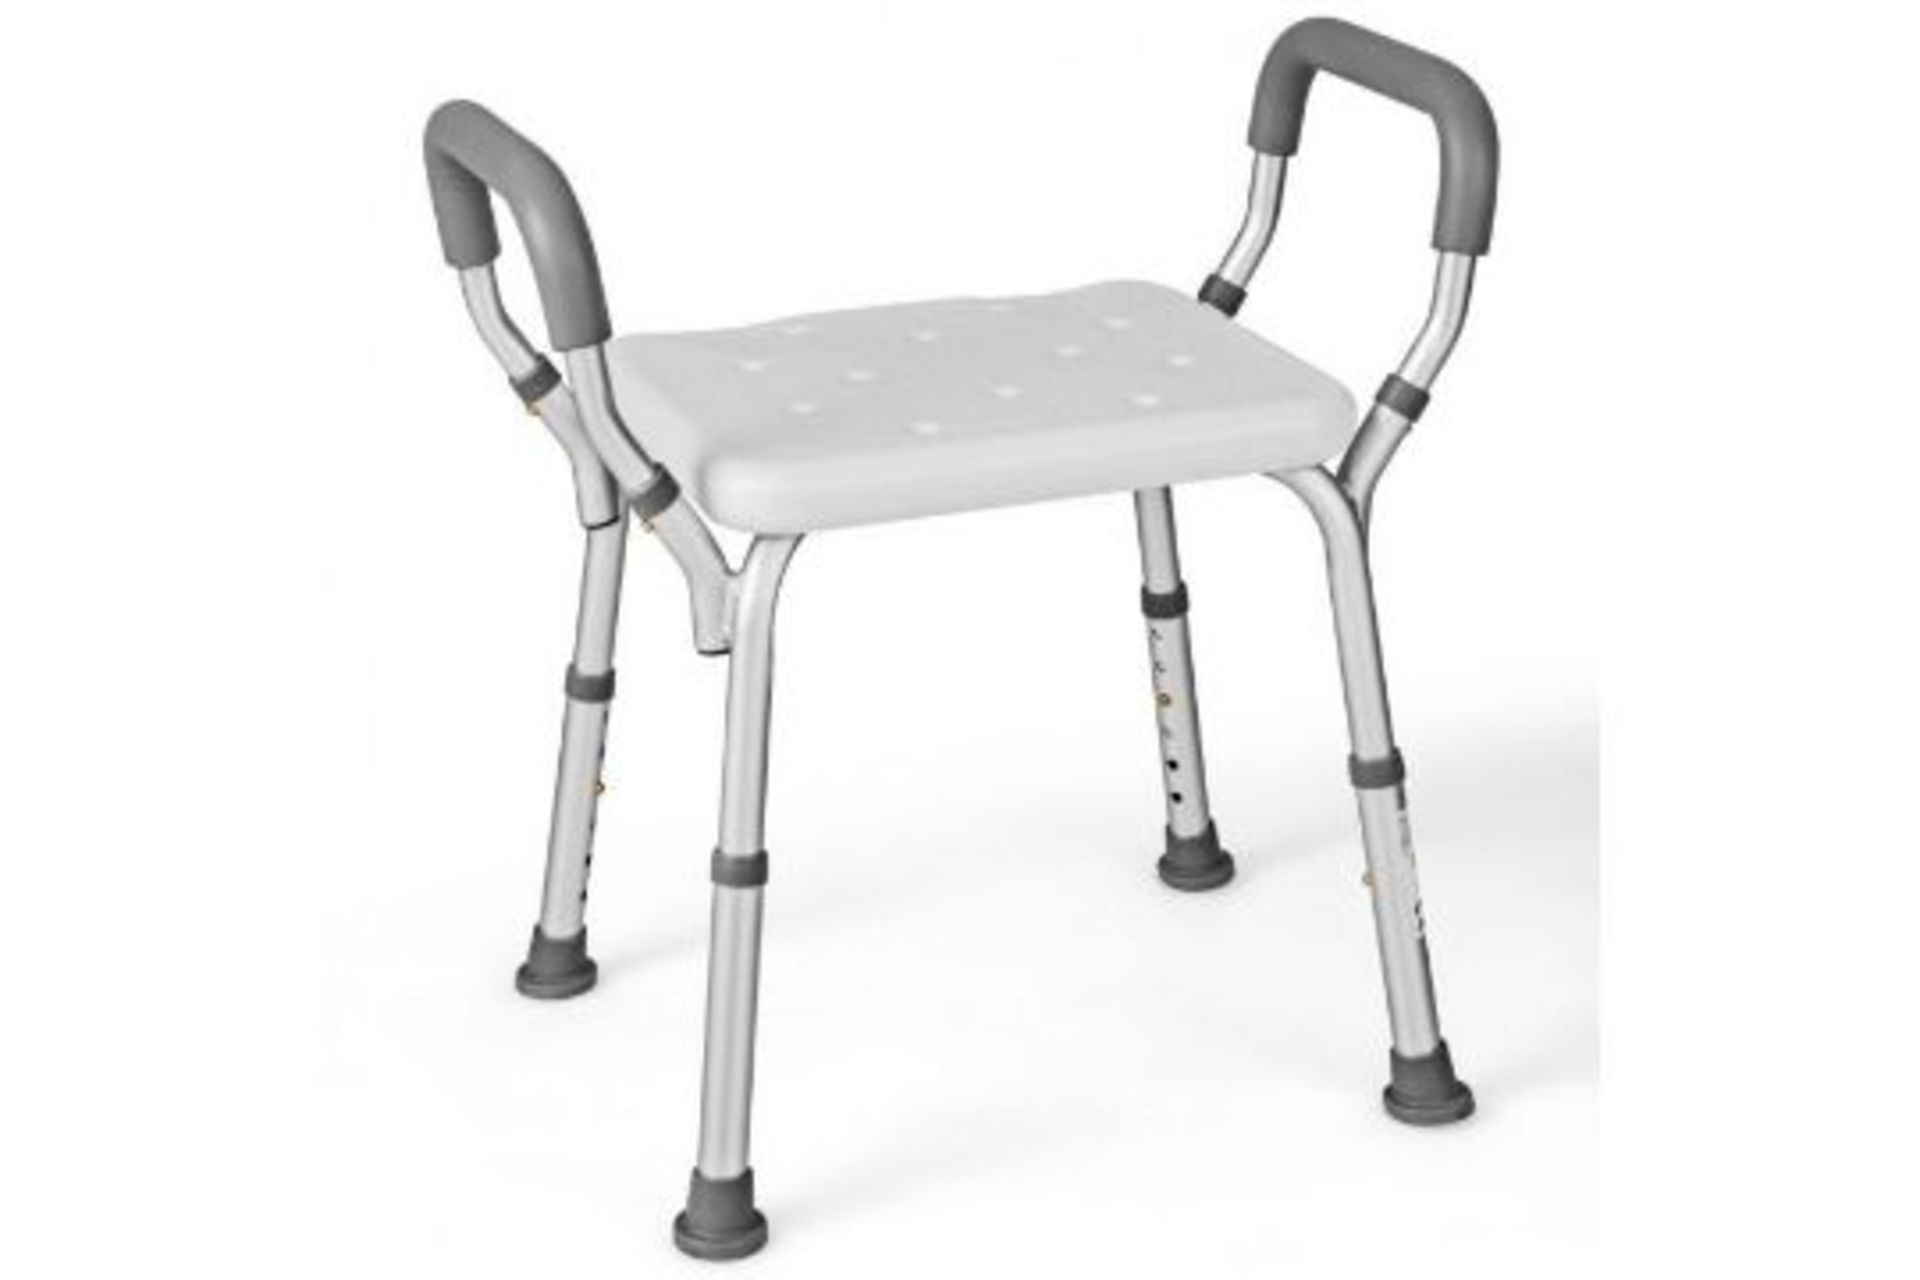 Bath Chair Shower Bench with Detachable Padded Arms. - R51.